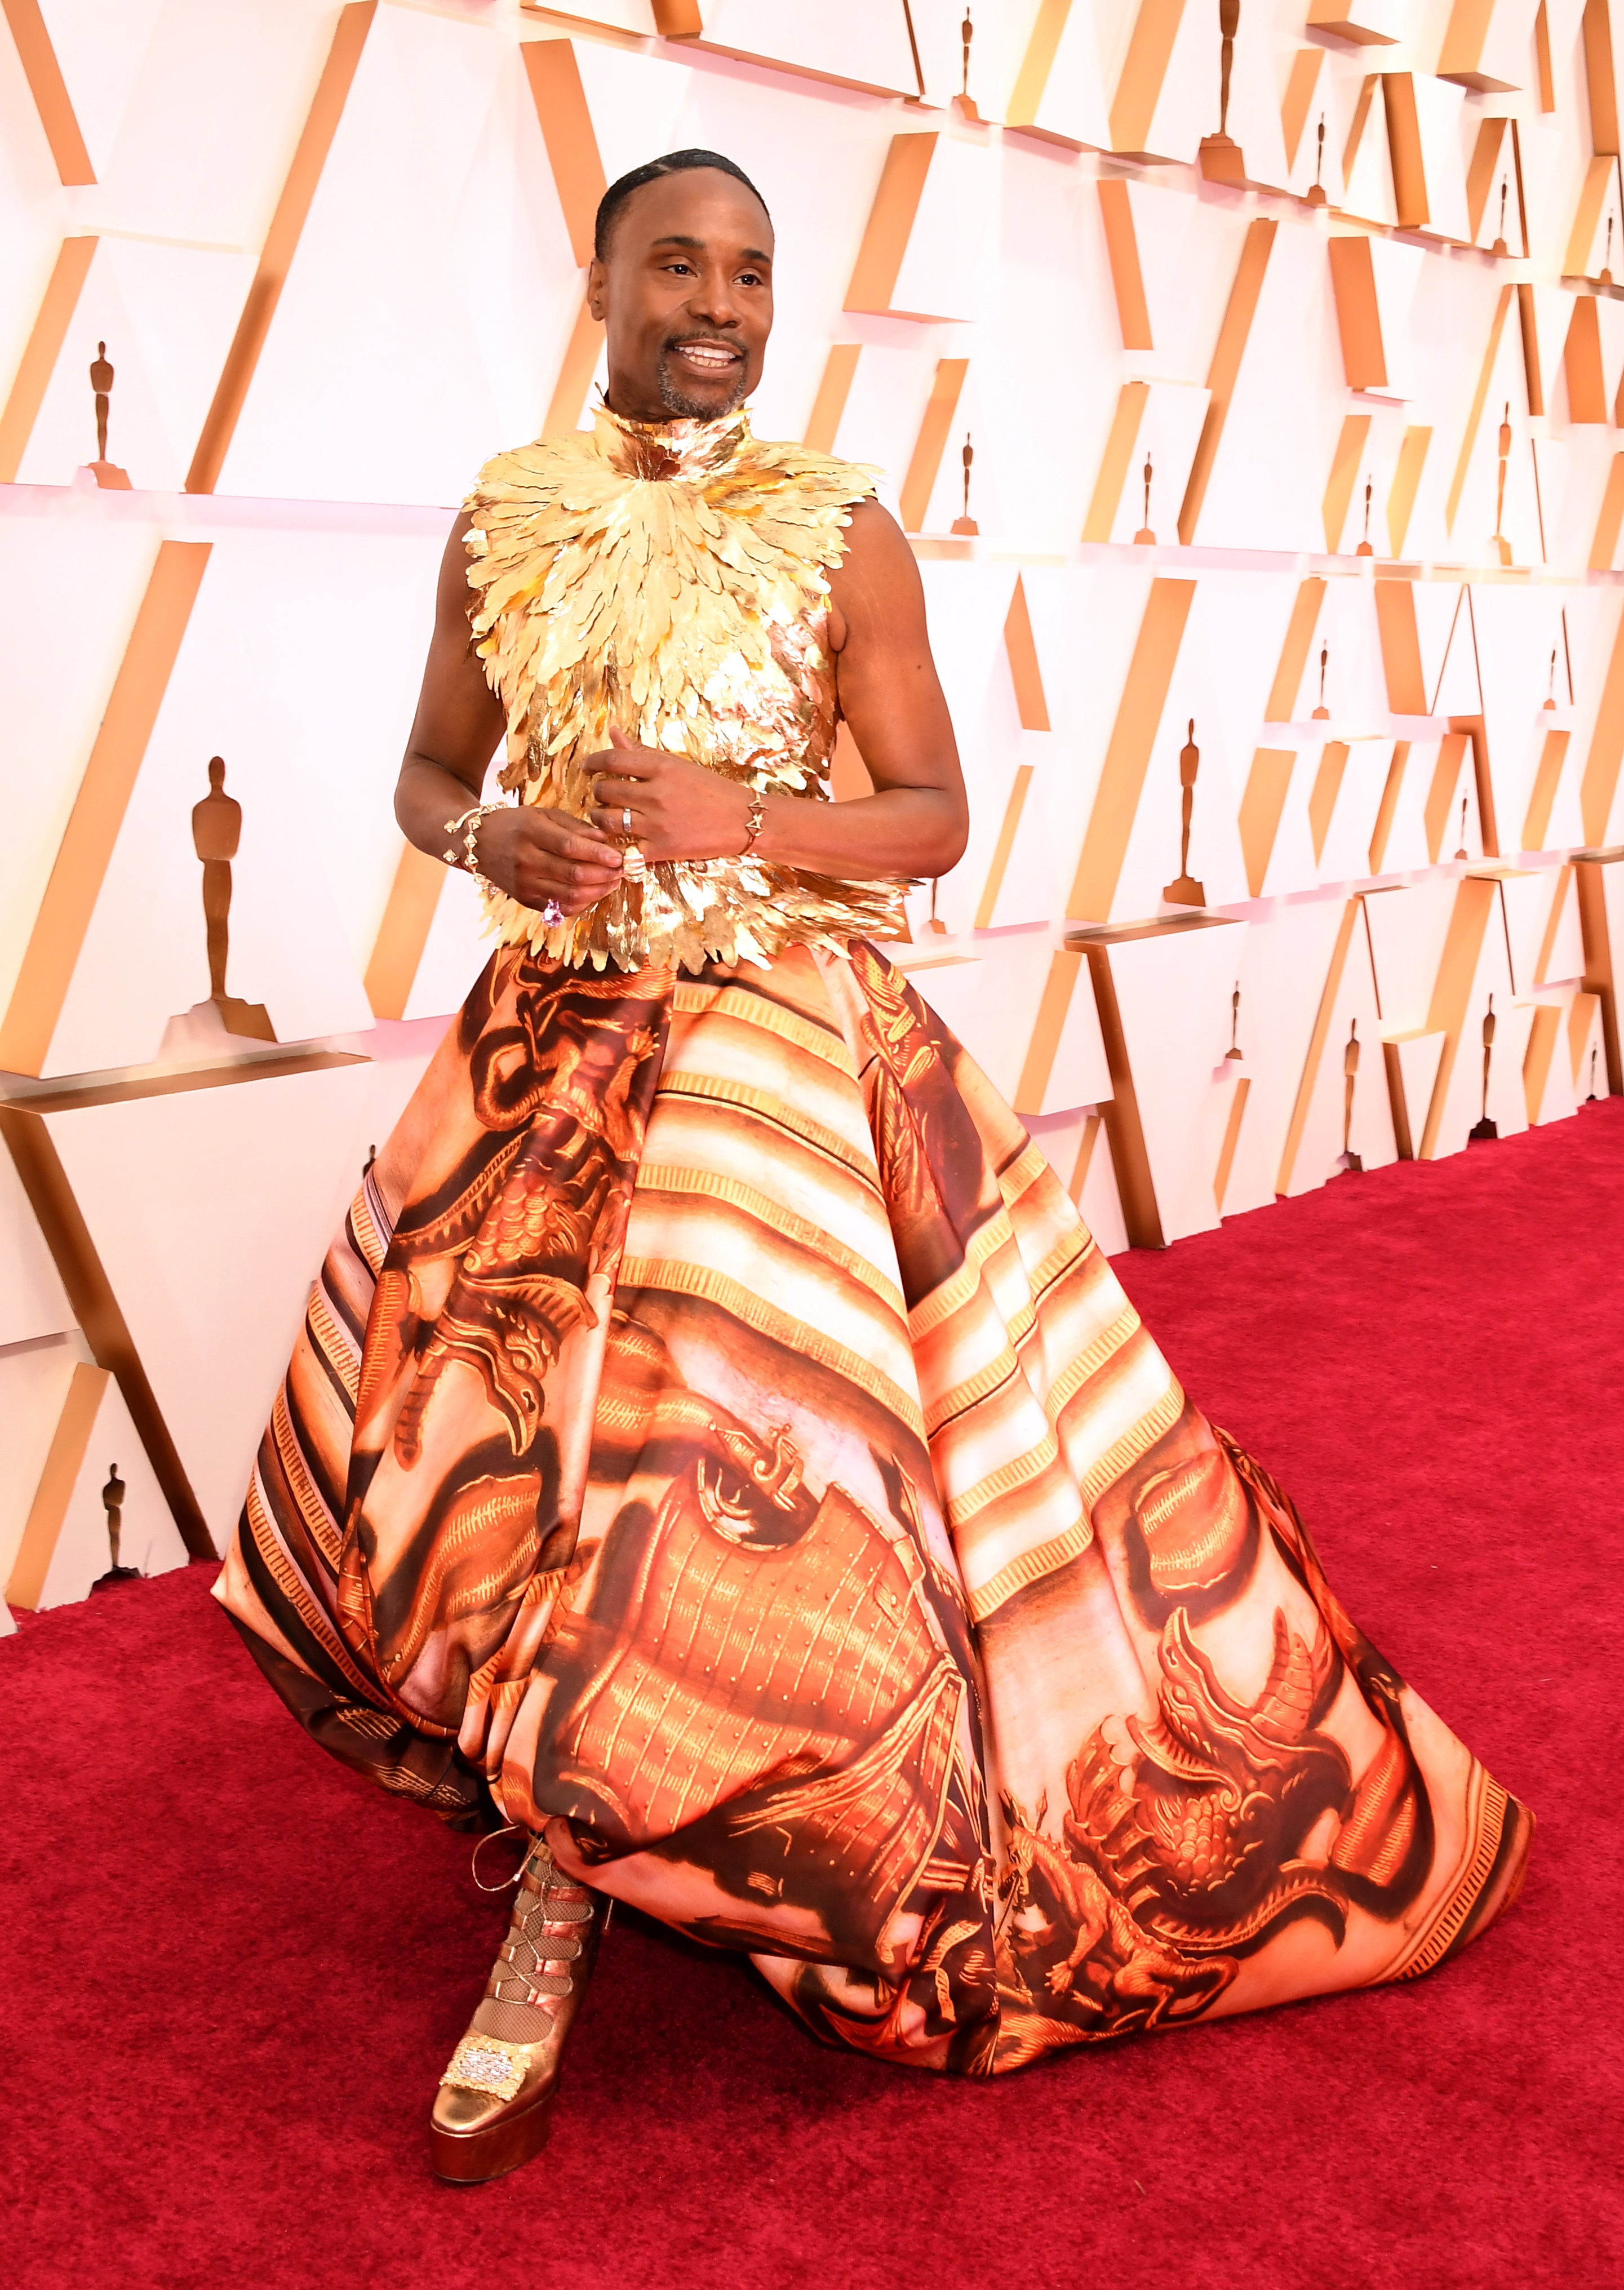 Billy Porter on the red carpet at the 92nd Academy Awards